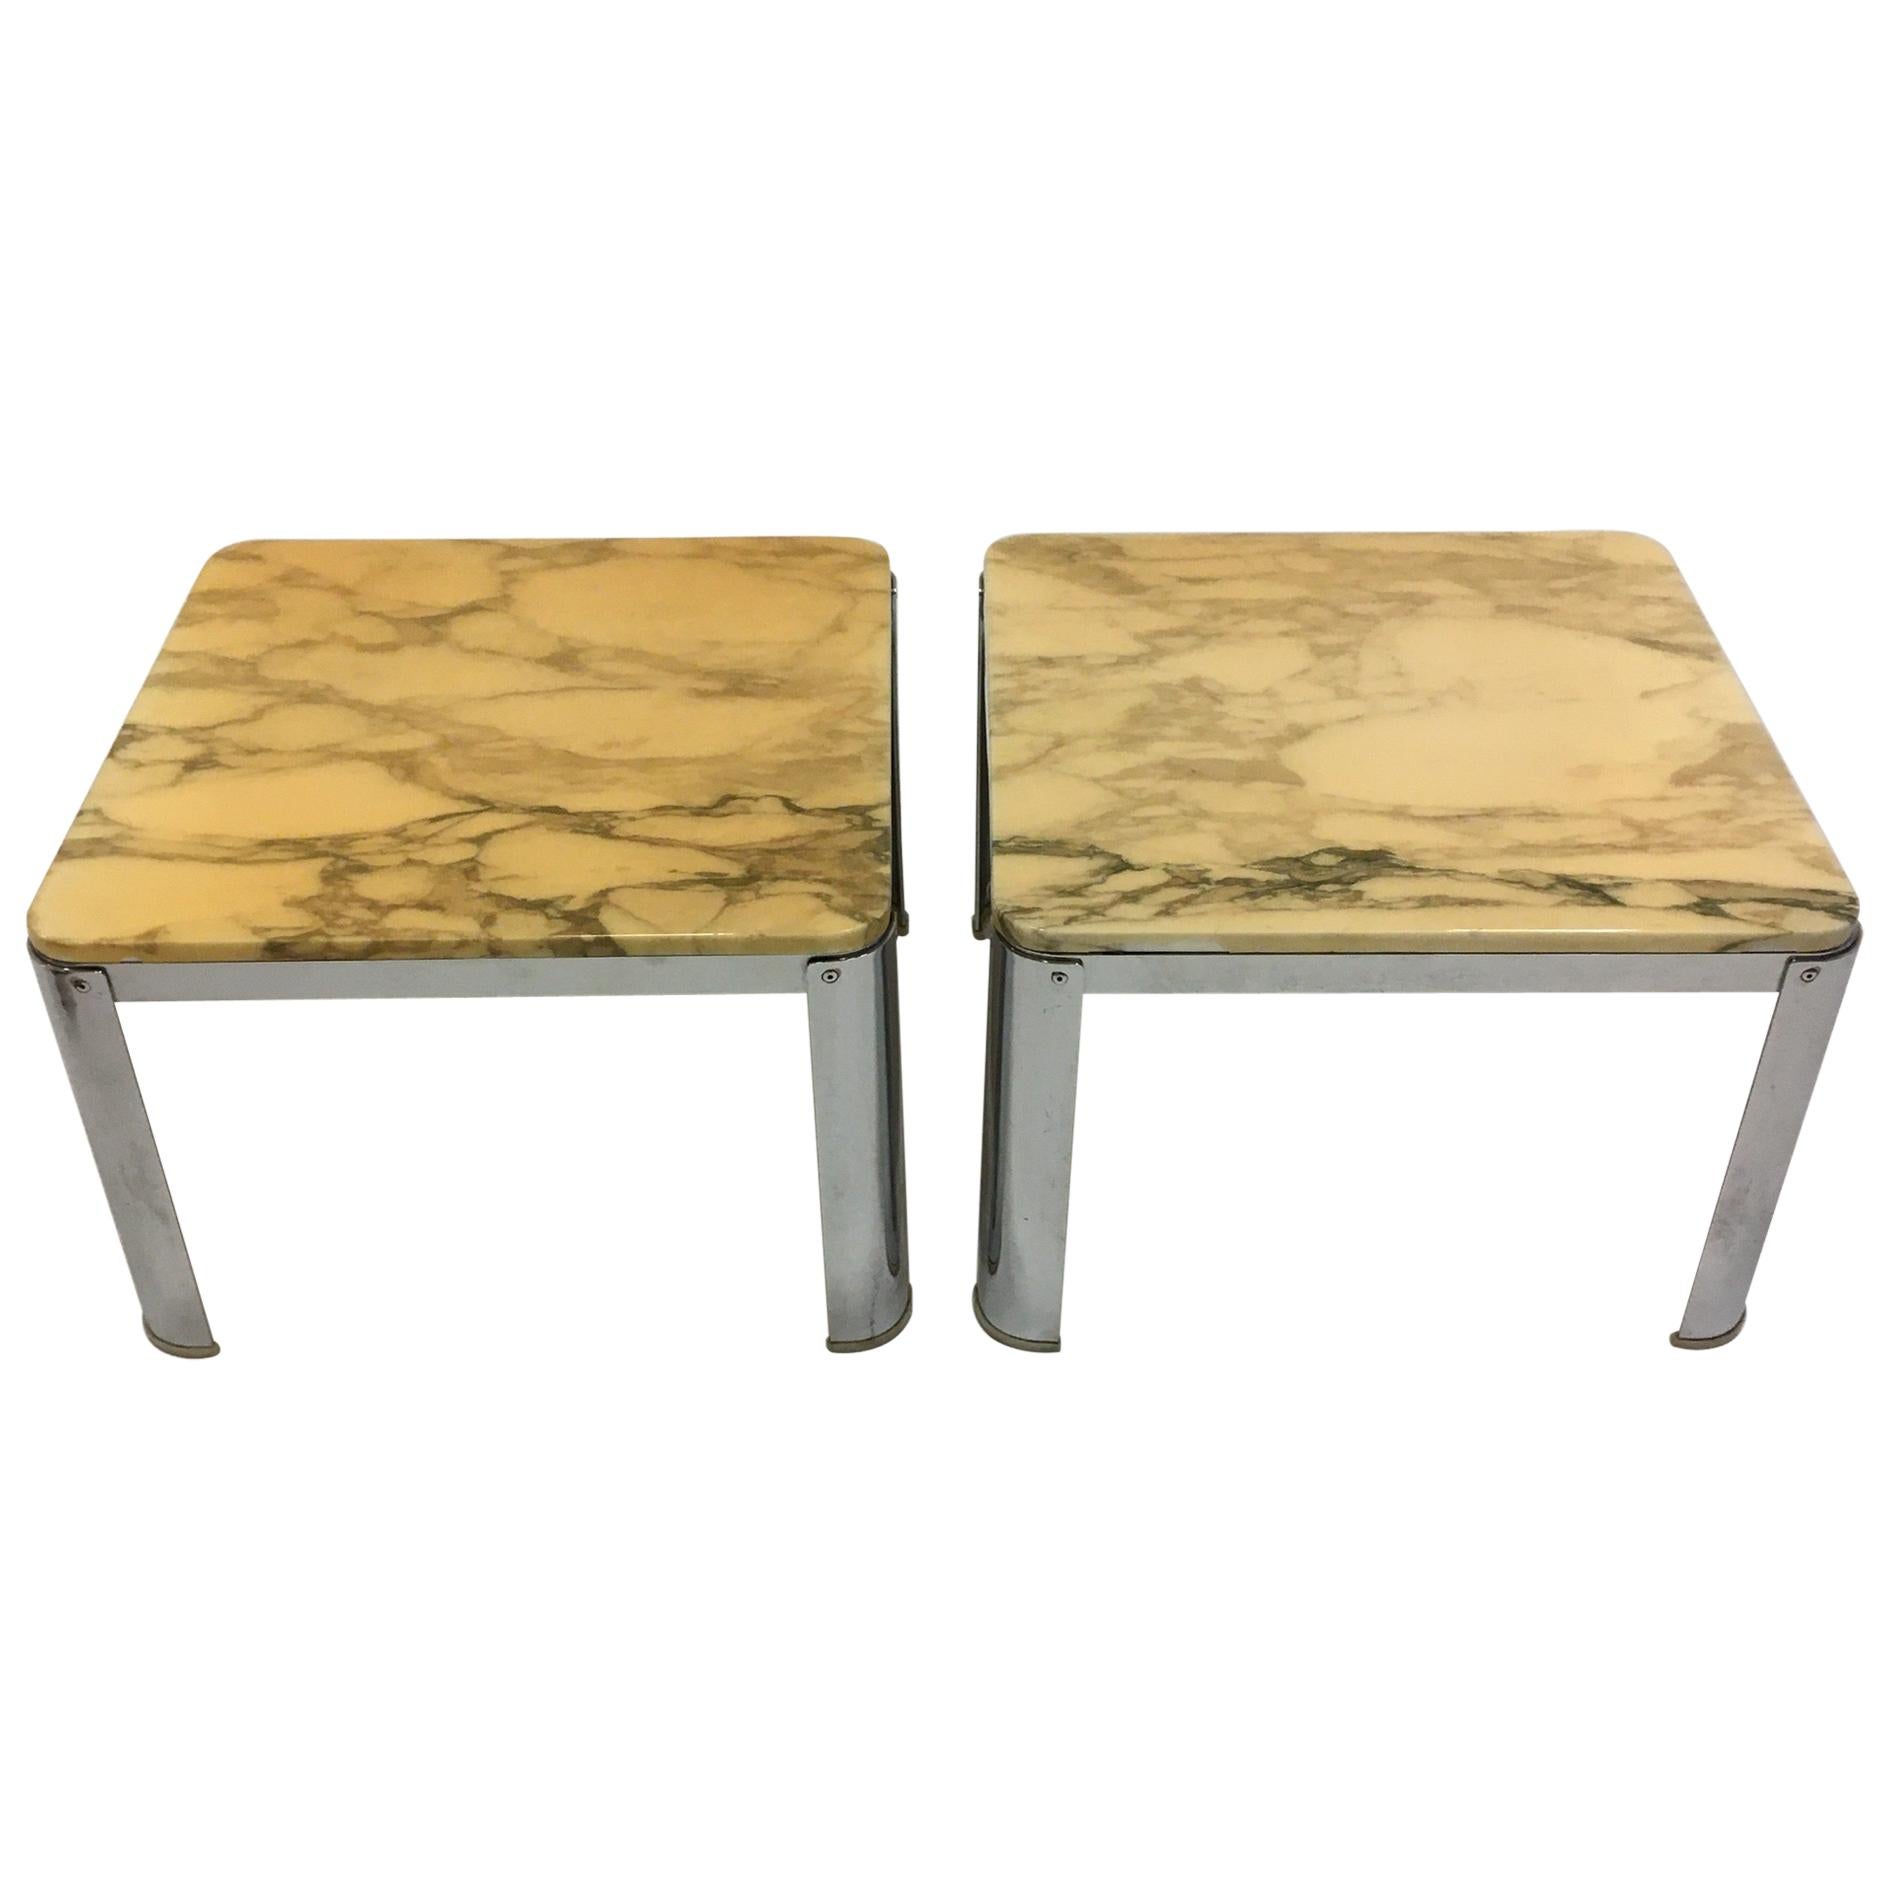 Vintage French Chrome Marble Coffee Tables in the Style of Maria Pergay, 1970